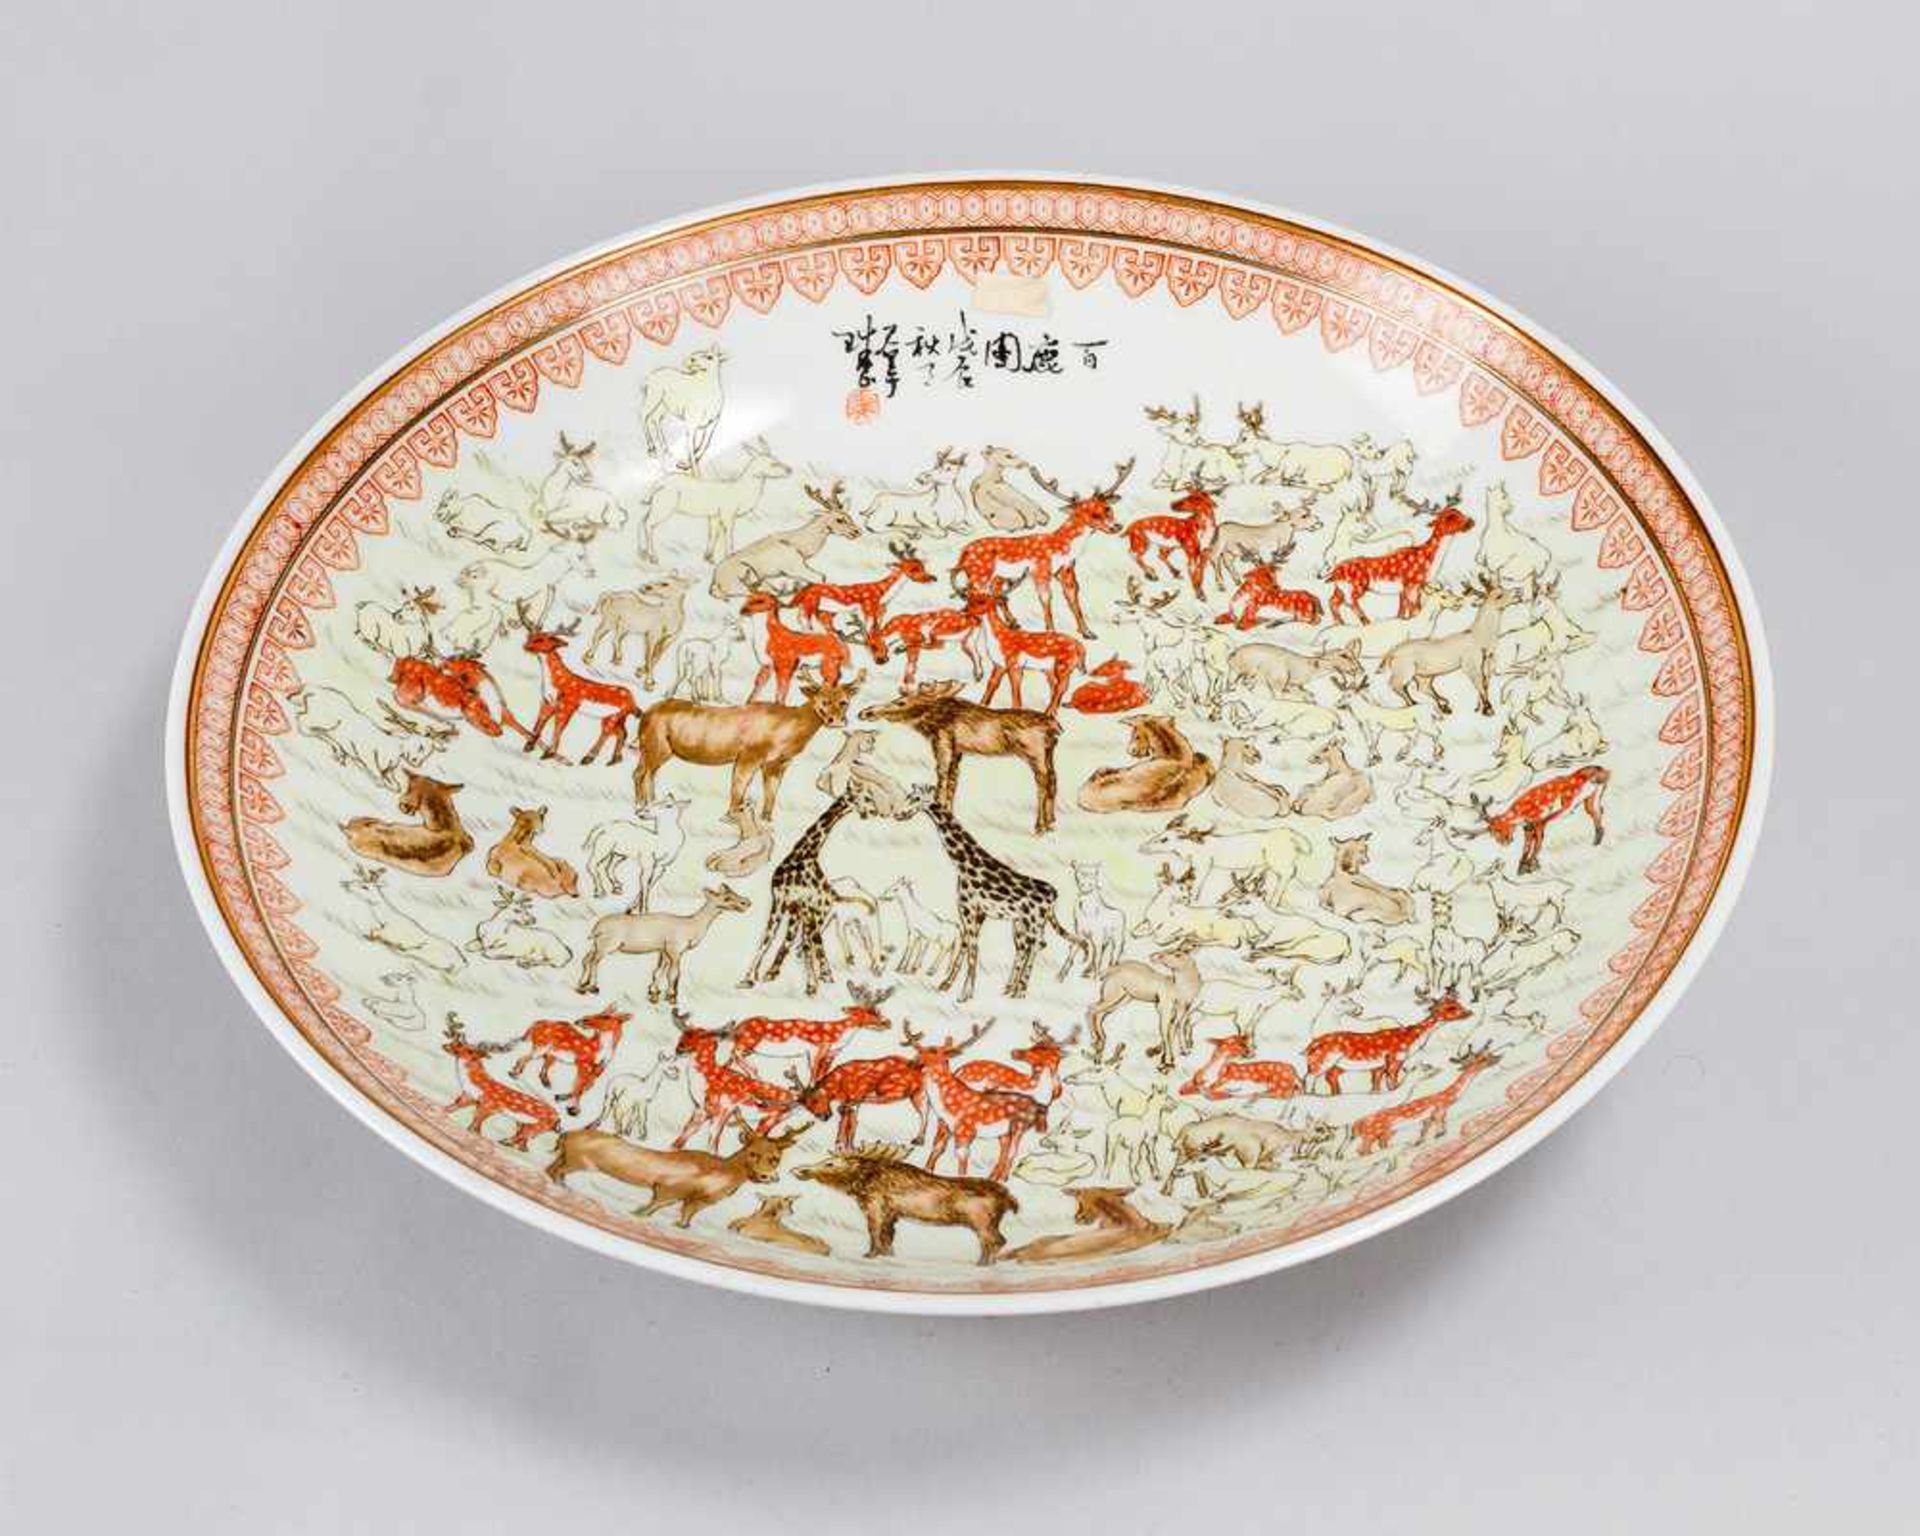 100 cloven hoofed animal plate, round shape with painted animals in different colours and red border